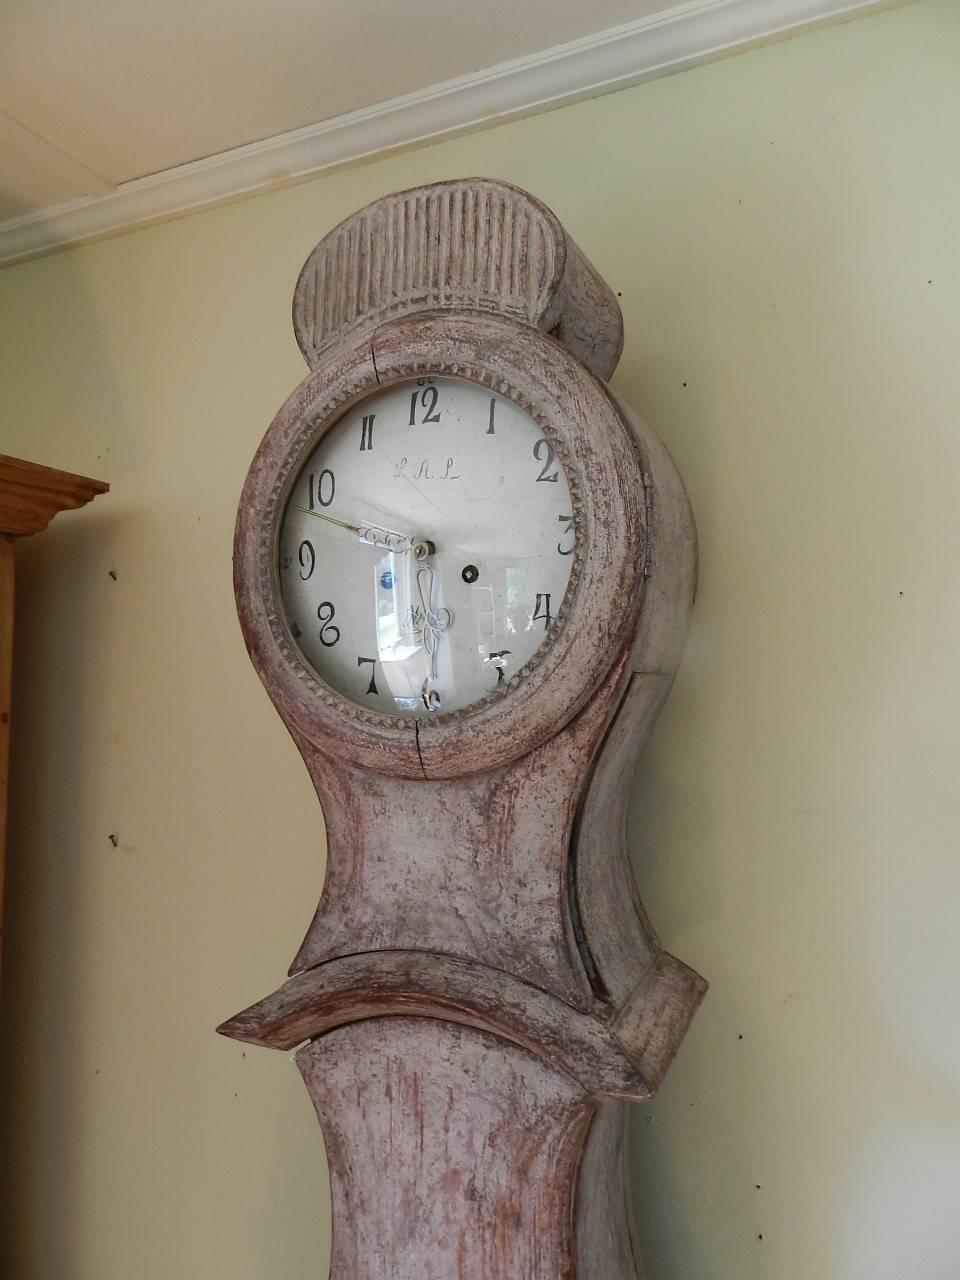 This is an antique Gustavian Moro clock with painted enamelled face bearing the maker's name of 